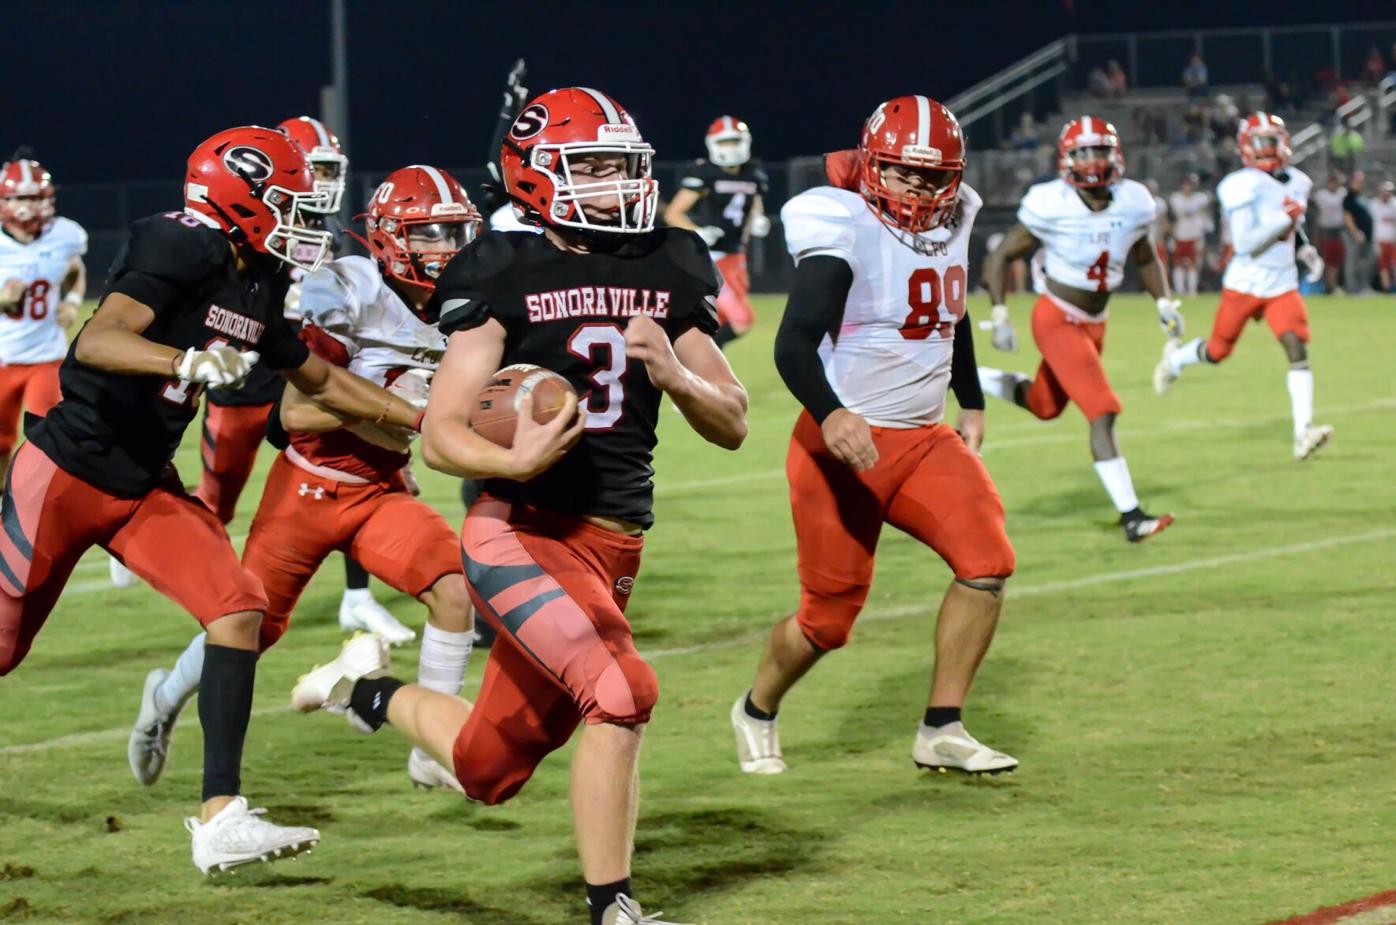 Sonoraville handles LFO on homecoming